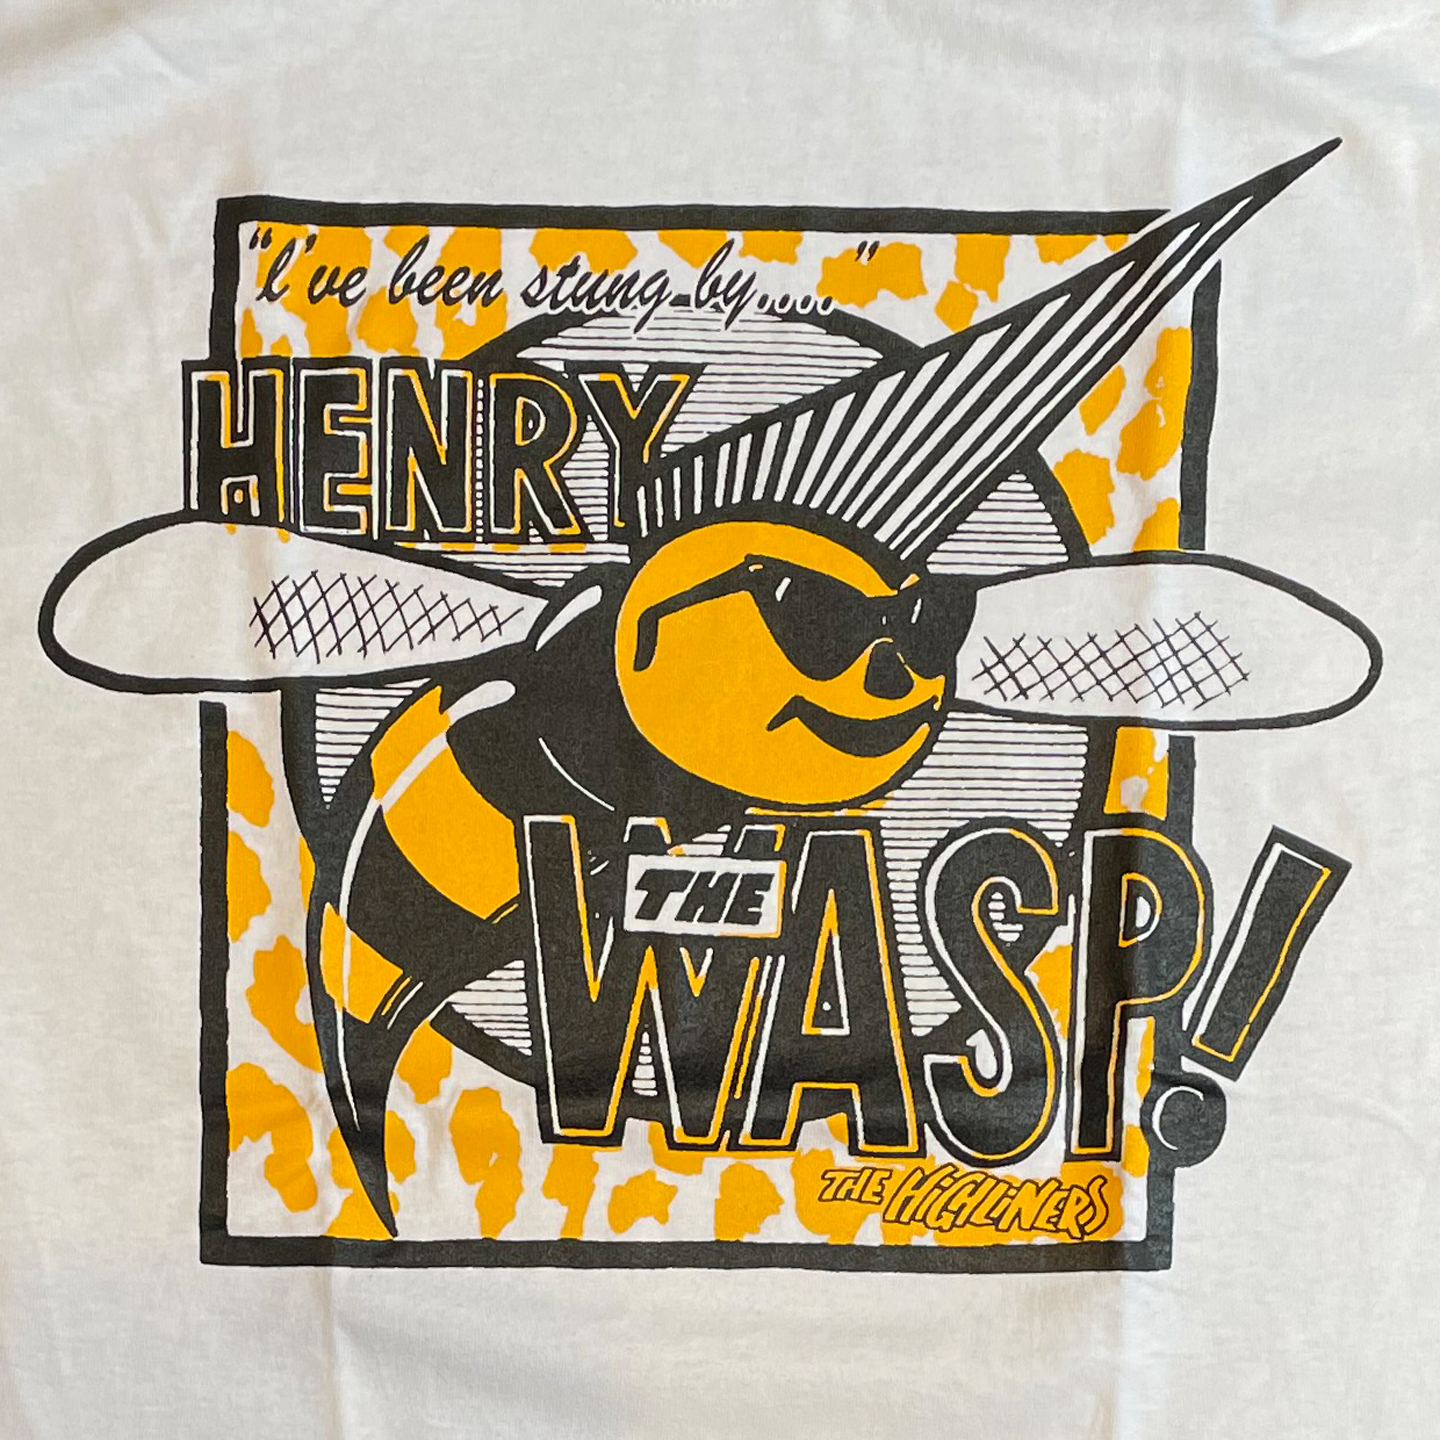 THE HIGHLINERS Tシャツ HENRY THE WASP